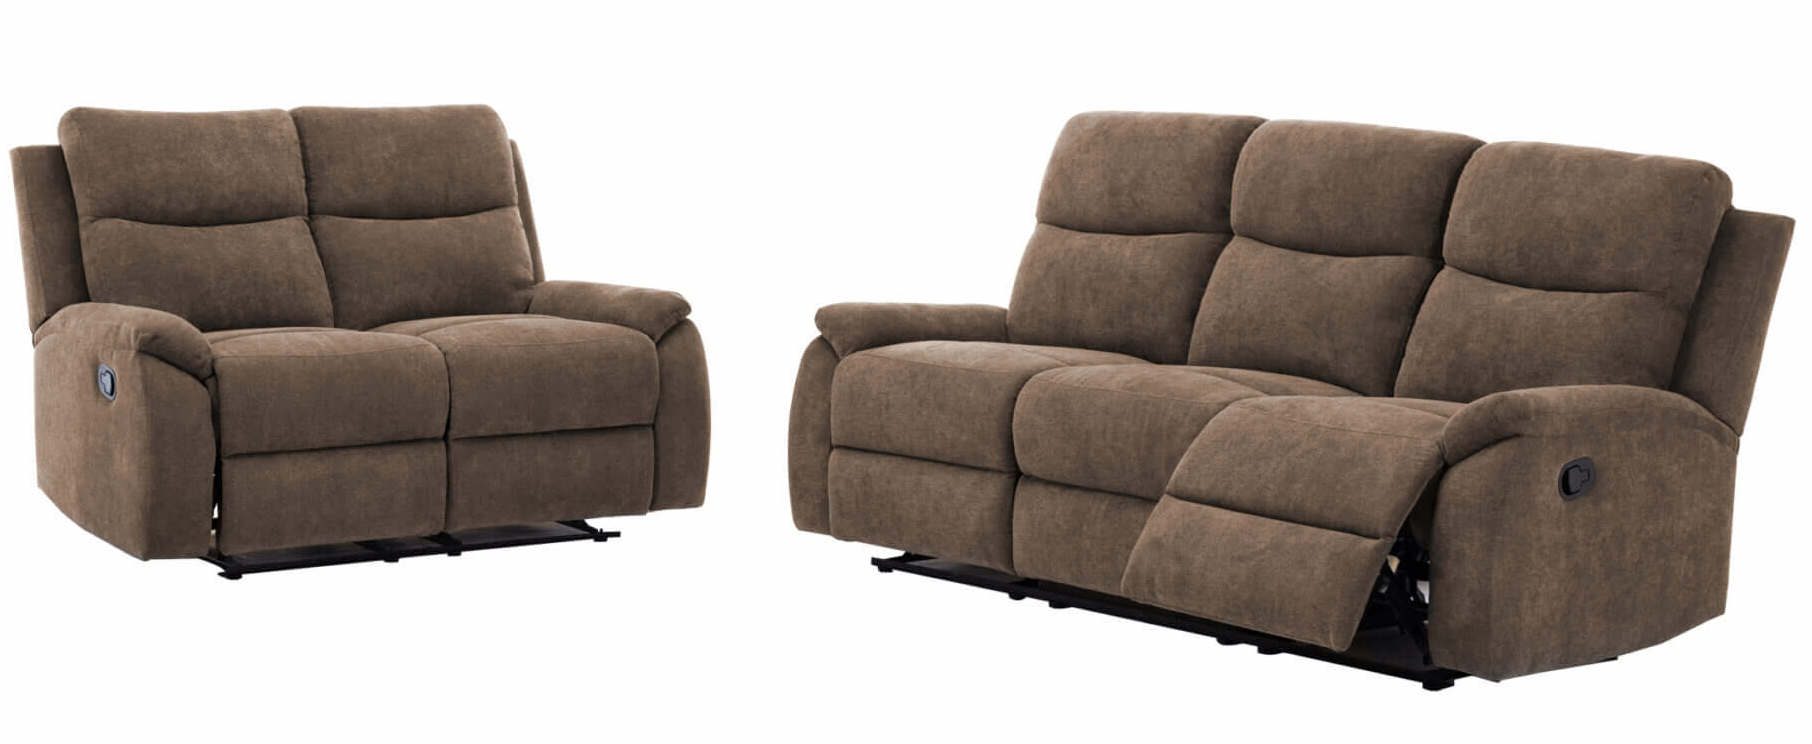 RONALD-BROWN-2PC- recliner product image